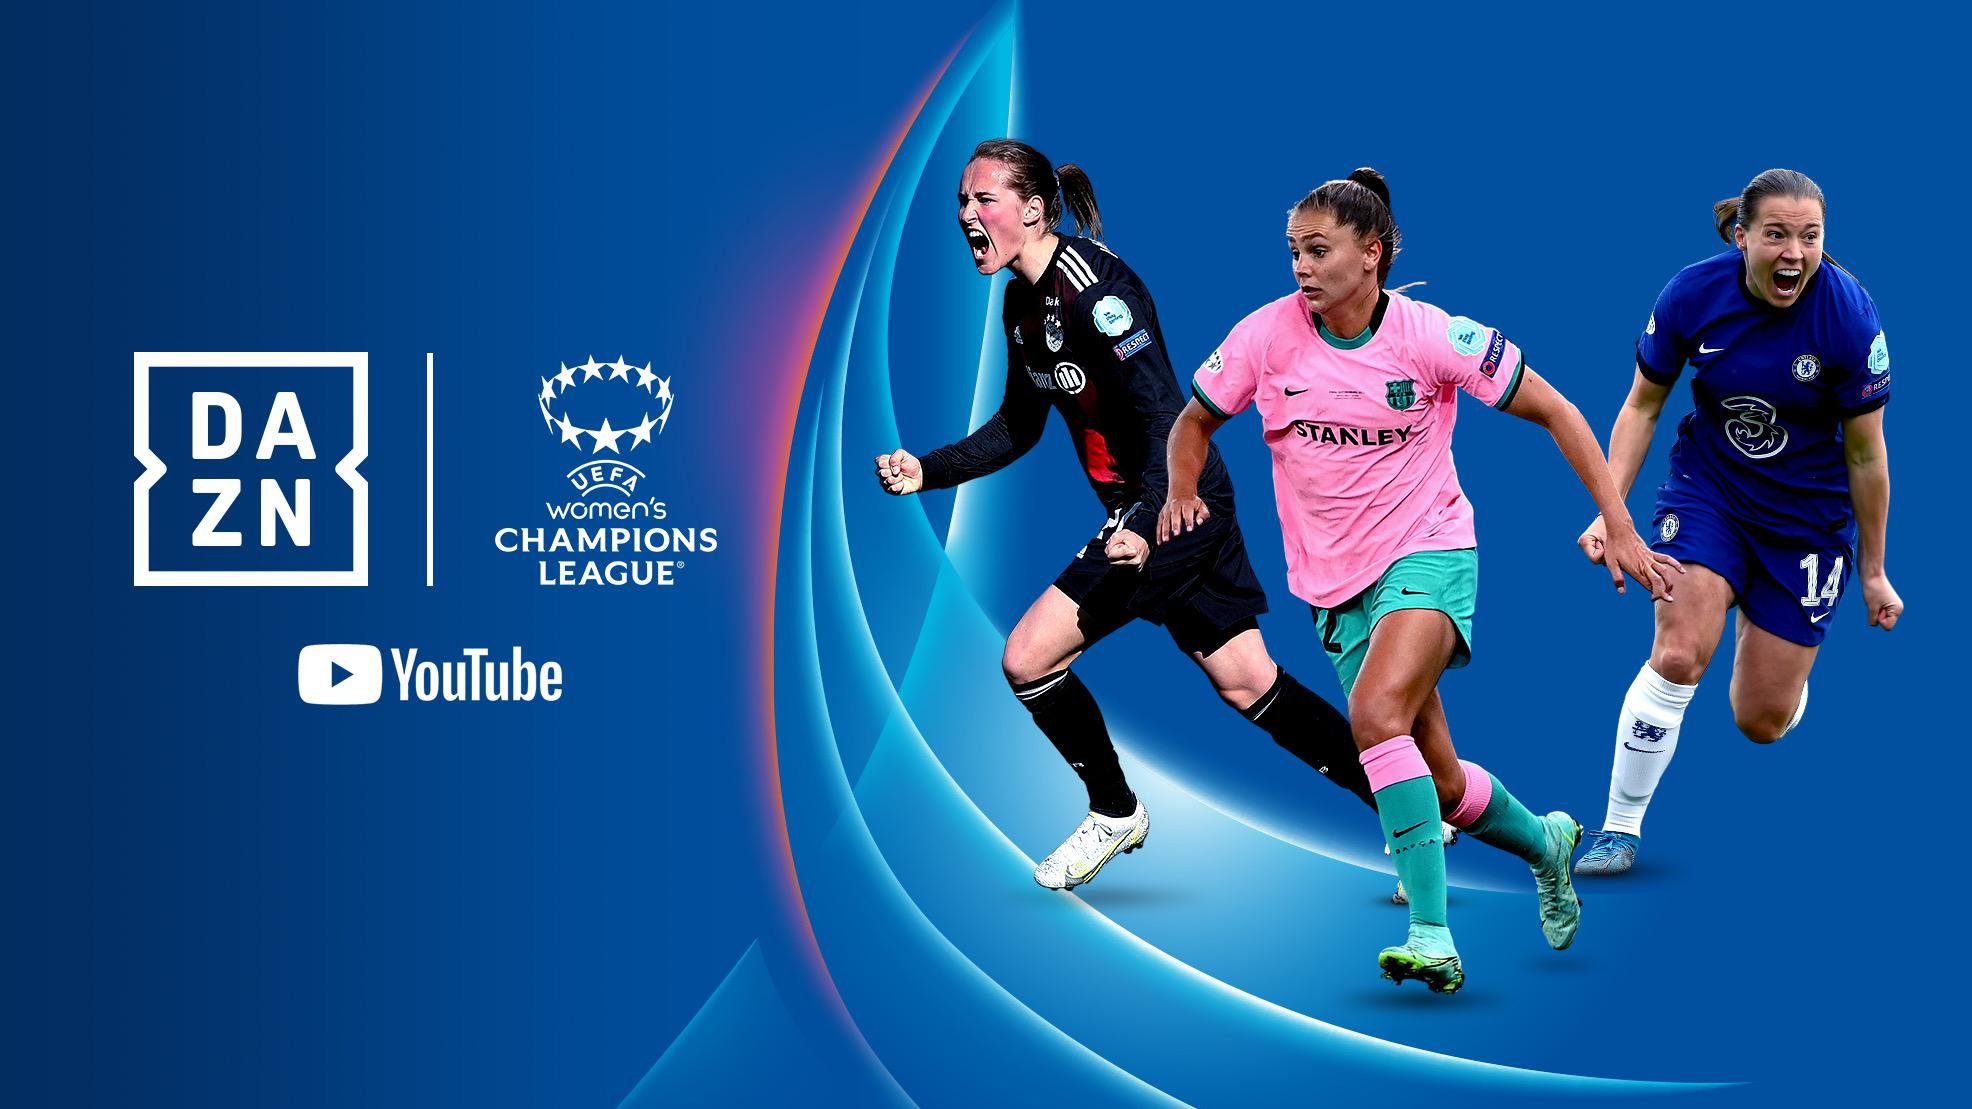 Women's Champions League deal with DAZN is proving ground for YouTube's live streaming credentials - Digital TV Europe